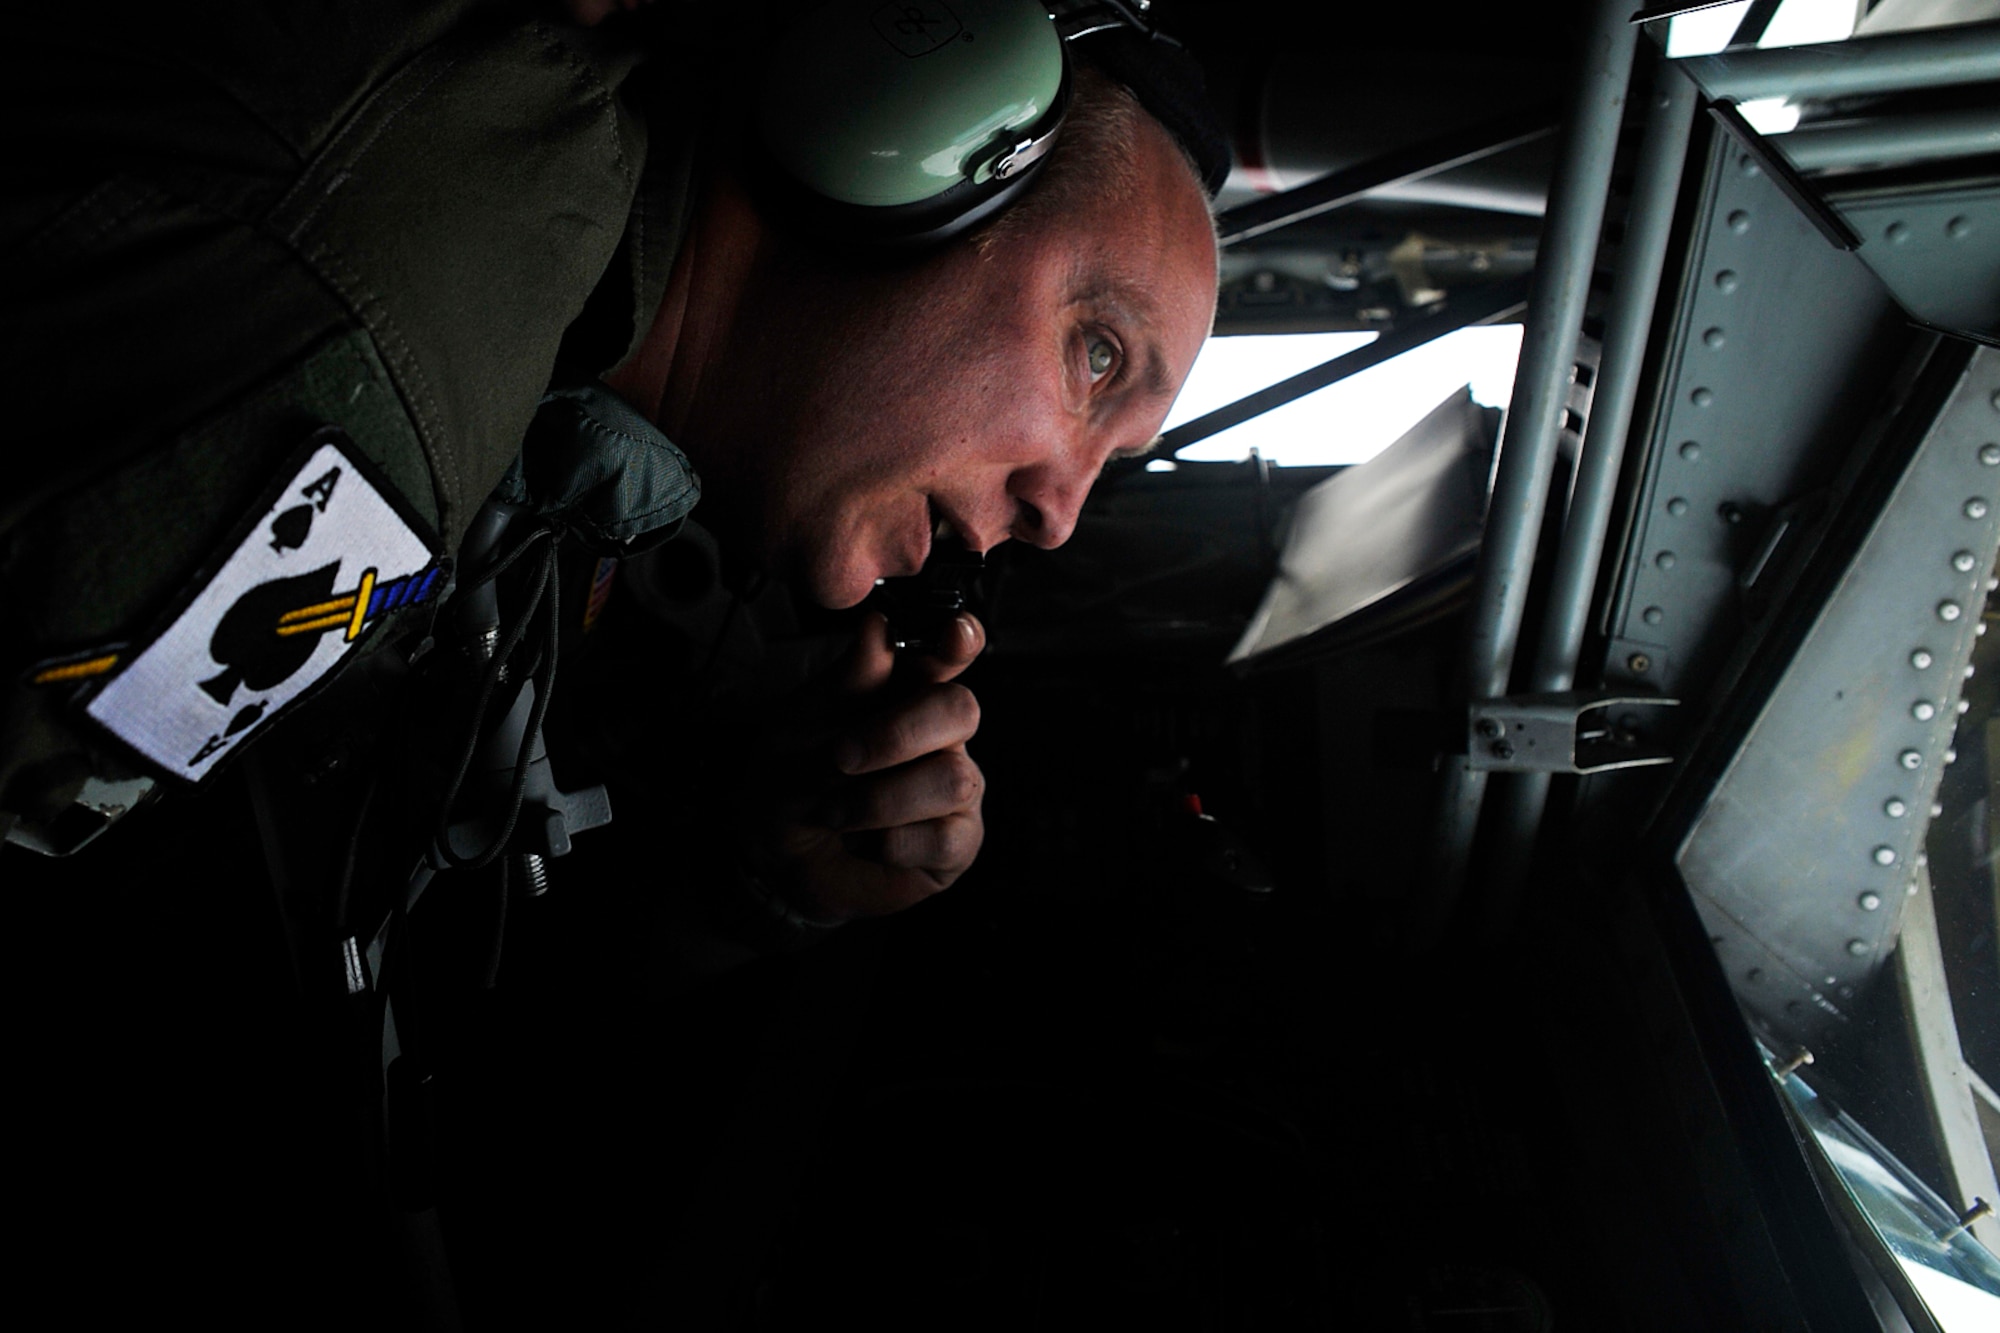 Tech. Sgt. Louis Winters, boom operator for the 116th Air Refueling Squadron, 141st Air Refueling Wing, performs air refueling operations over the Adriatic Sea with an F-16 Fighting Falcon from the 510th Fighter Squadron stationed at Aviano Air Base, Italy, Nov., 15, 2017. The Washington Air National Guard KC-135 unit routinely works with active duty flying units in both training and real world aerial refueling operations. (Washington Air National Guard photo by Tech. Sgt. Tim Chacon)